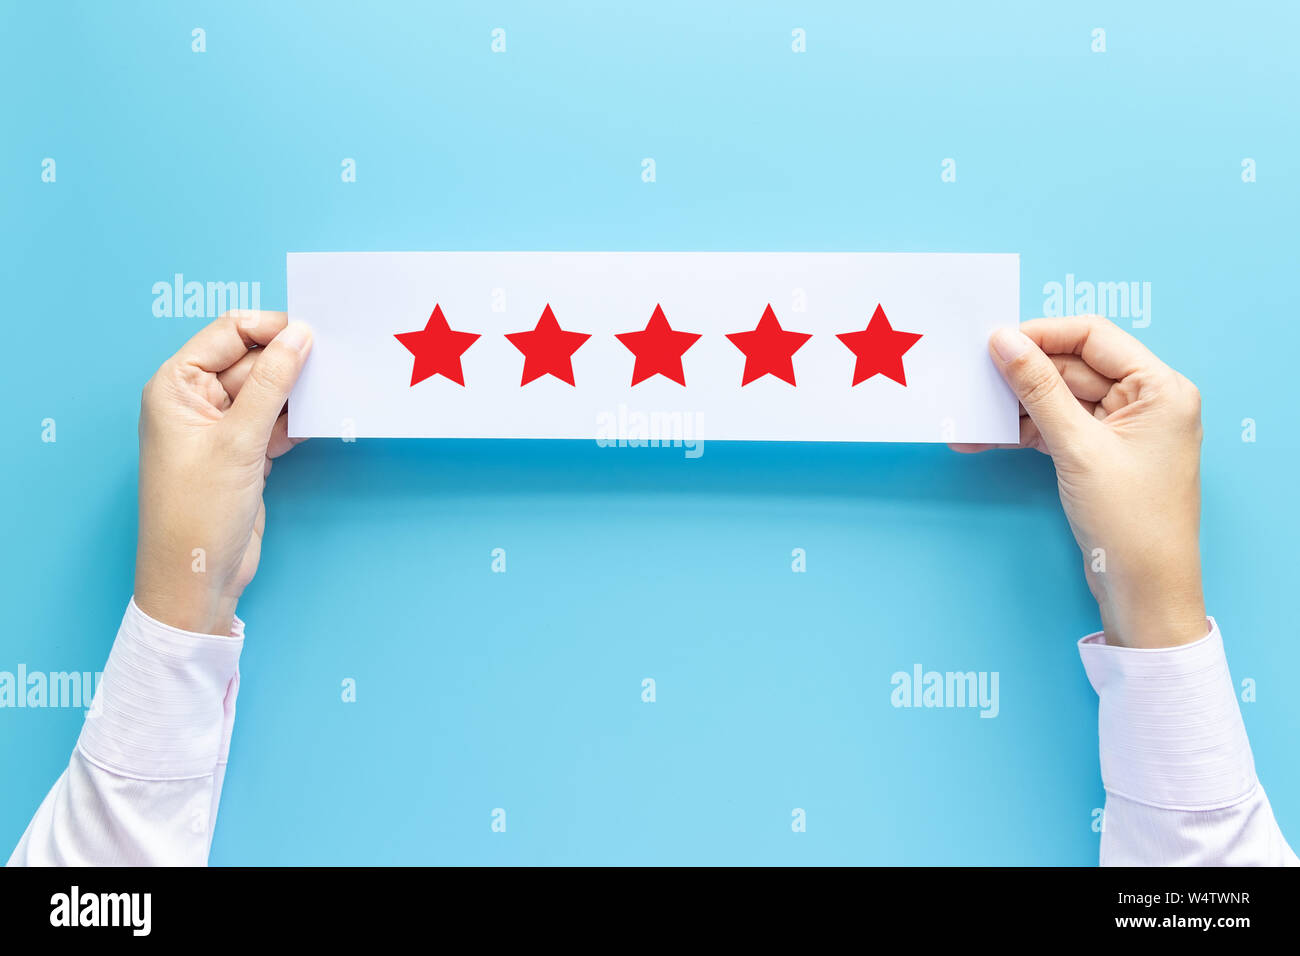 rating and feedback concept. customer holding paper with satisfied review by give five star for service experience Stock Photo